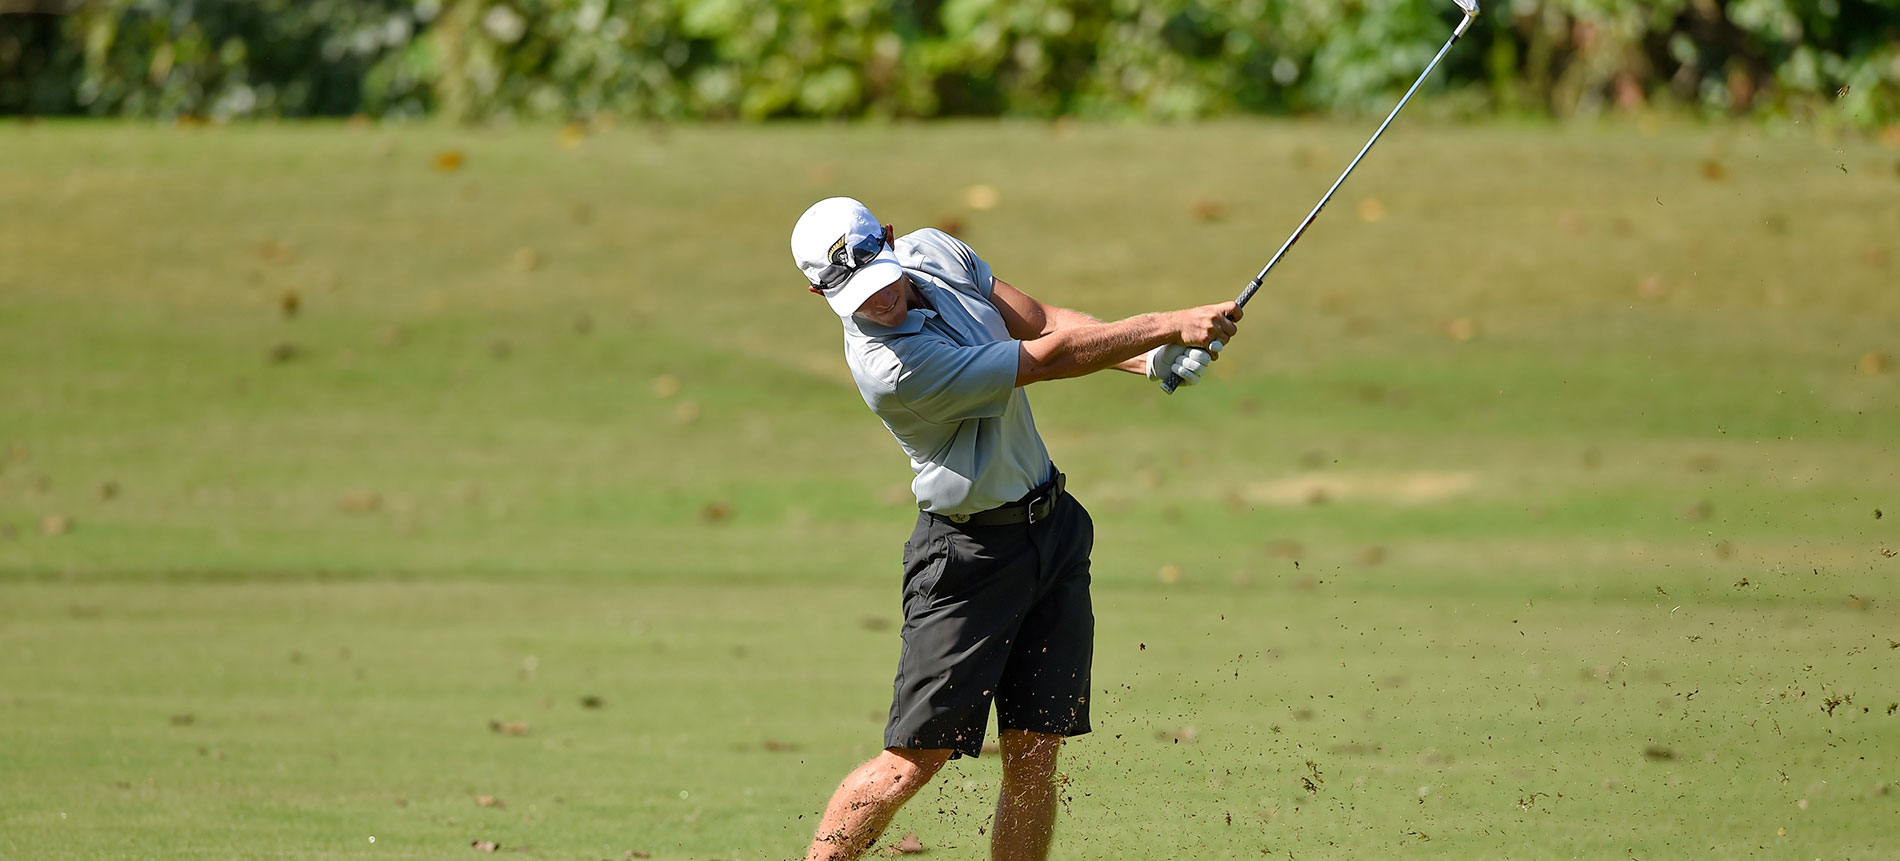 Miller Finishes in a Tie for 32nd Place at South Carolina Men’s State Amateur Championship